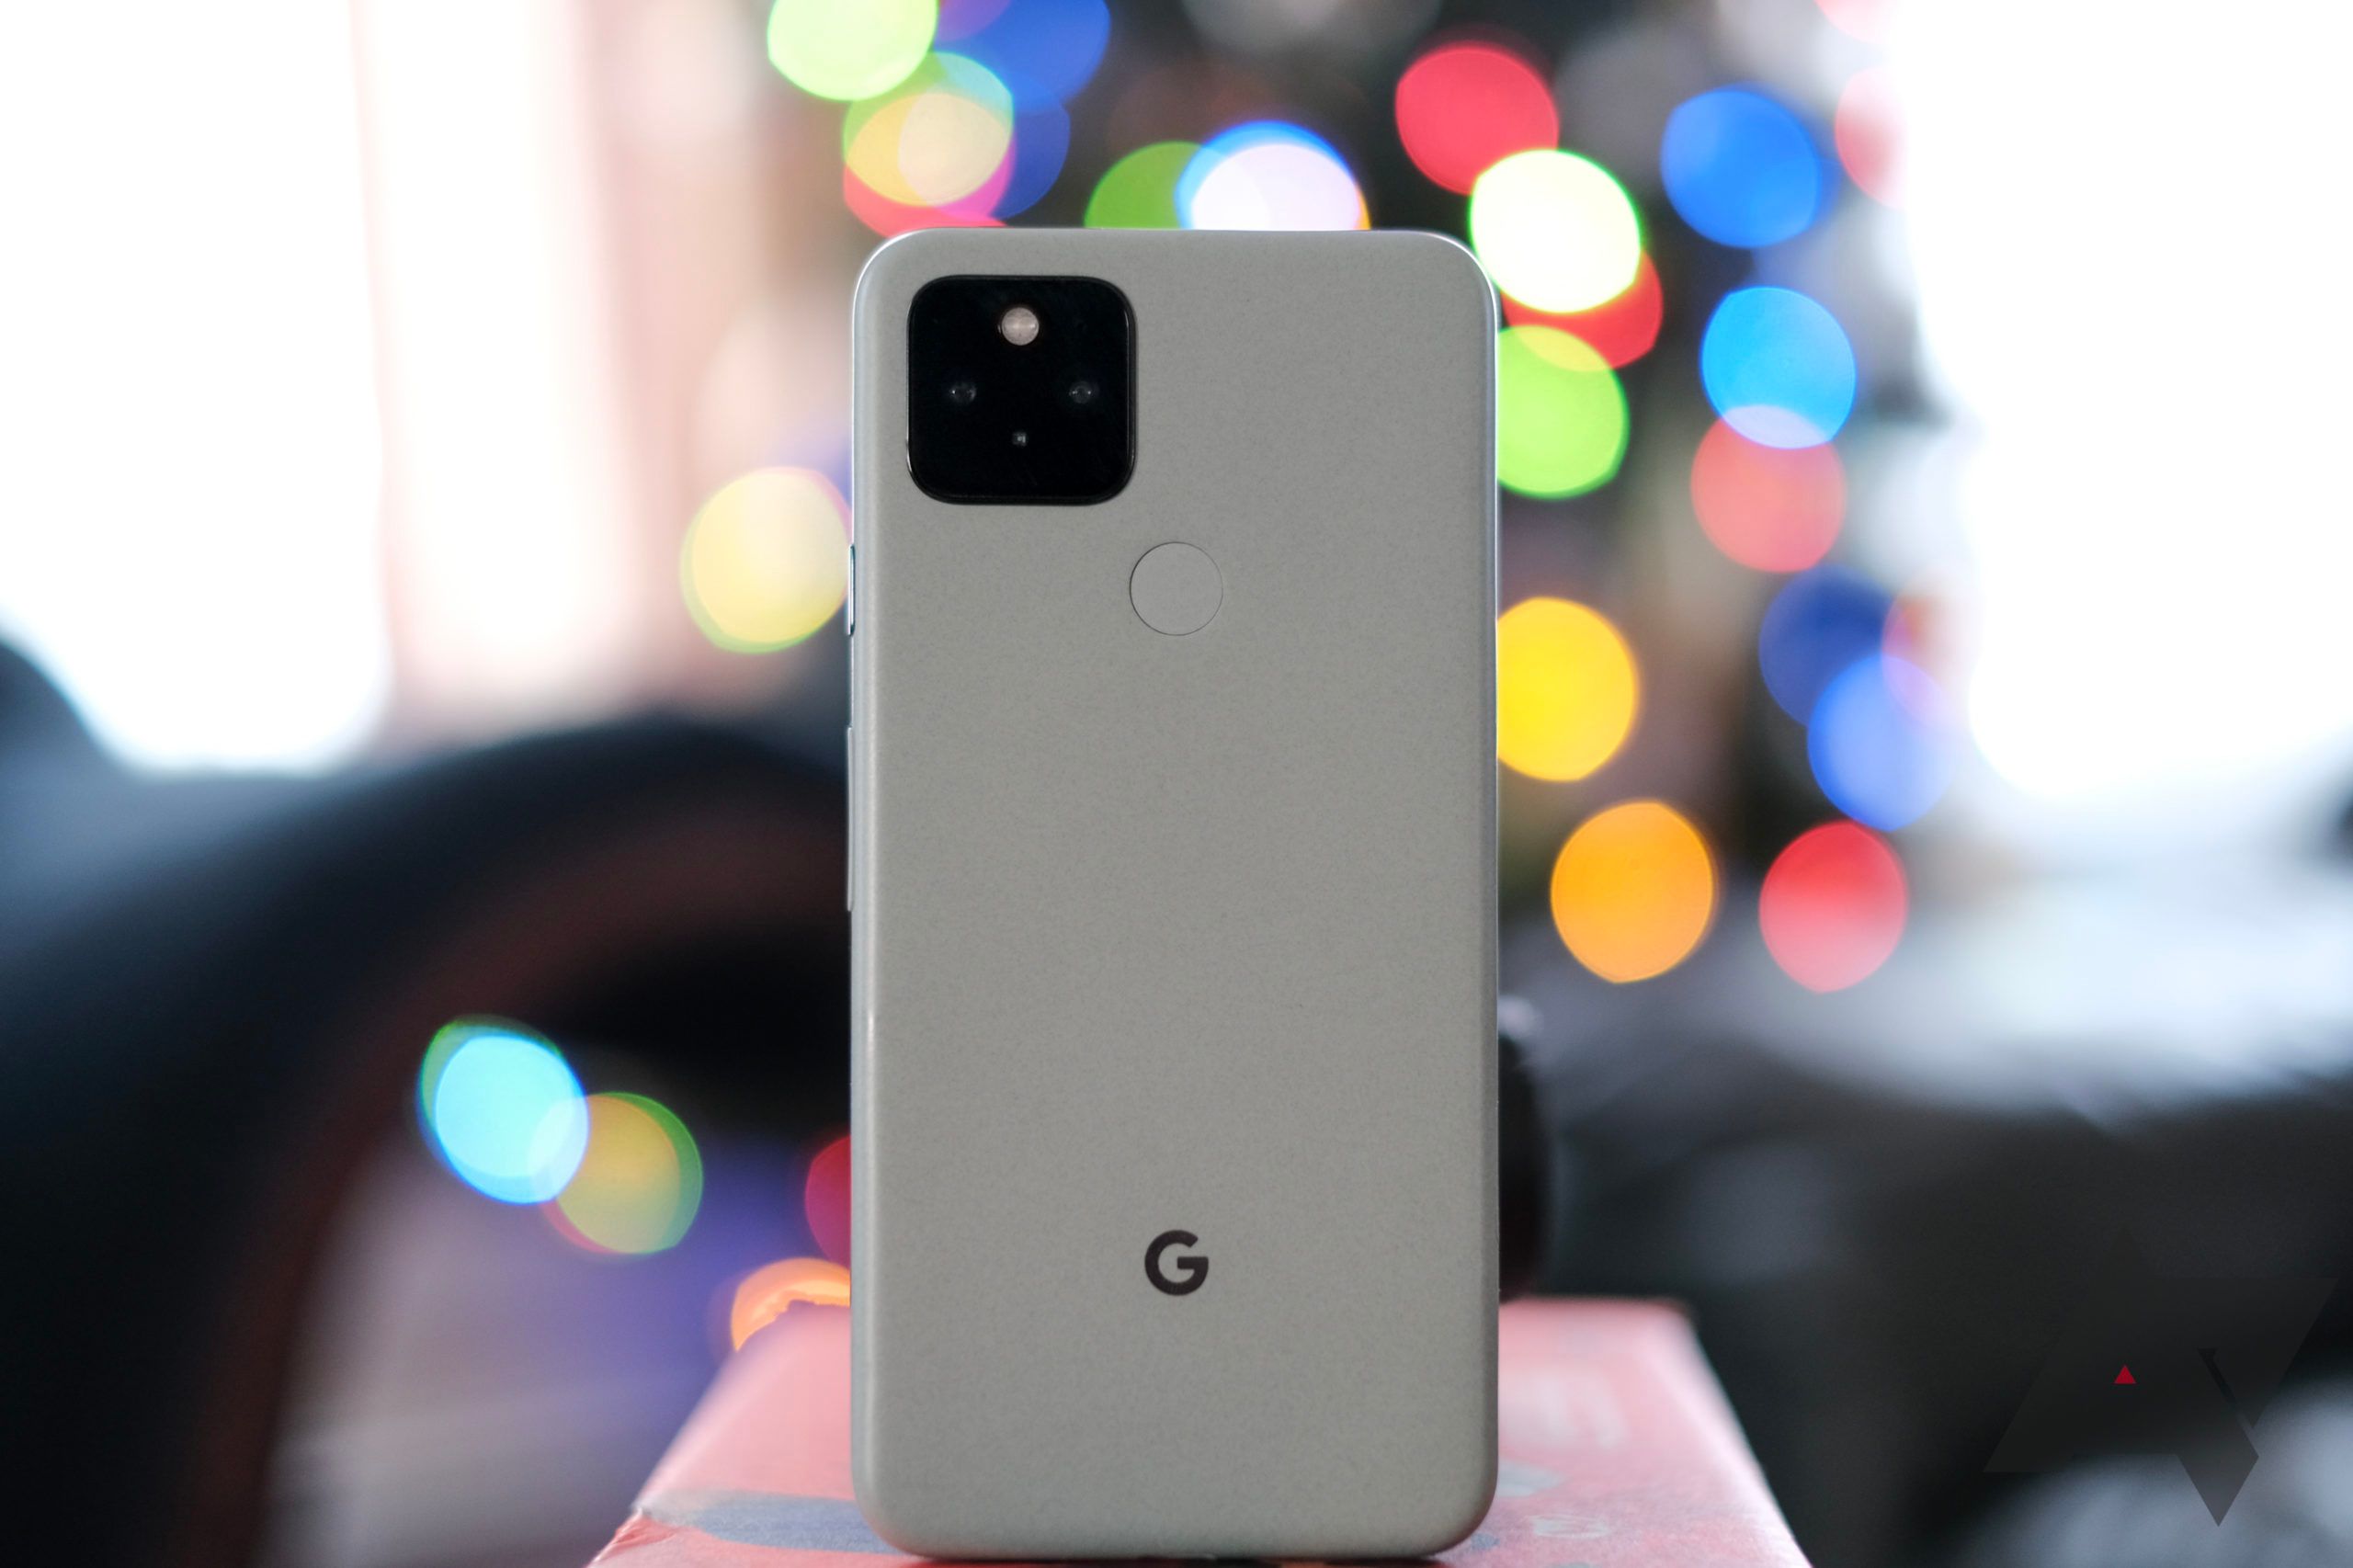 A wild Pixel 5 and Pixel 4a (5G) update appears